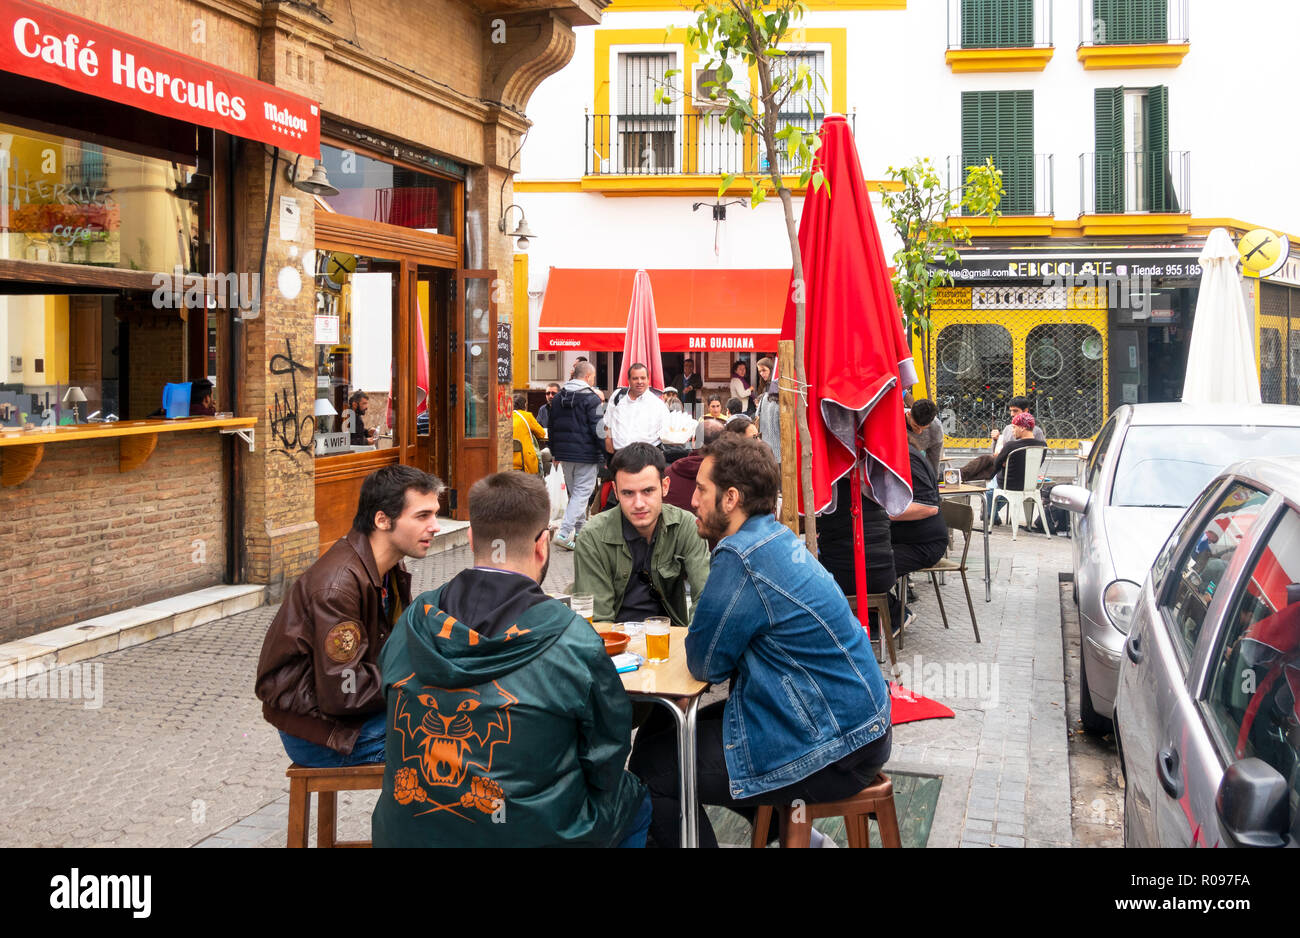 Four male friends at the Cafe Hercules in Seville, Spain Stock Photo